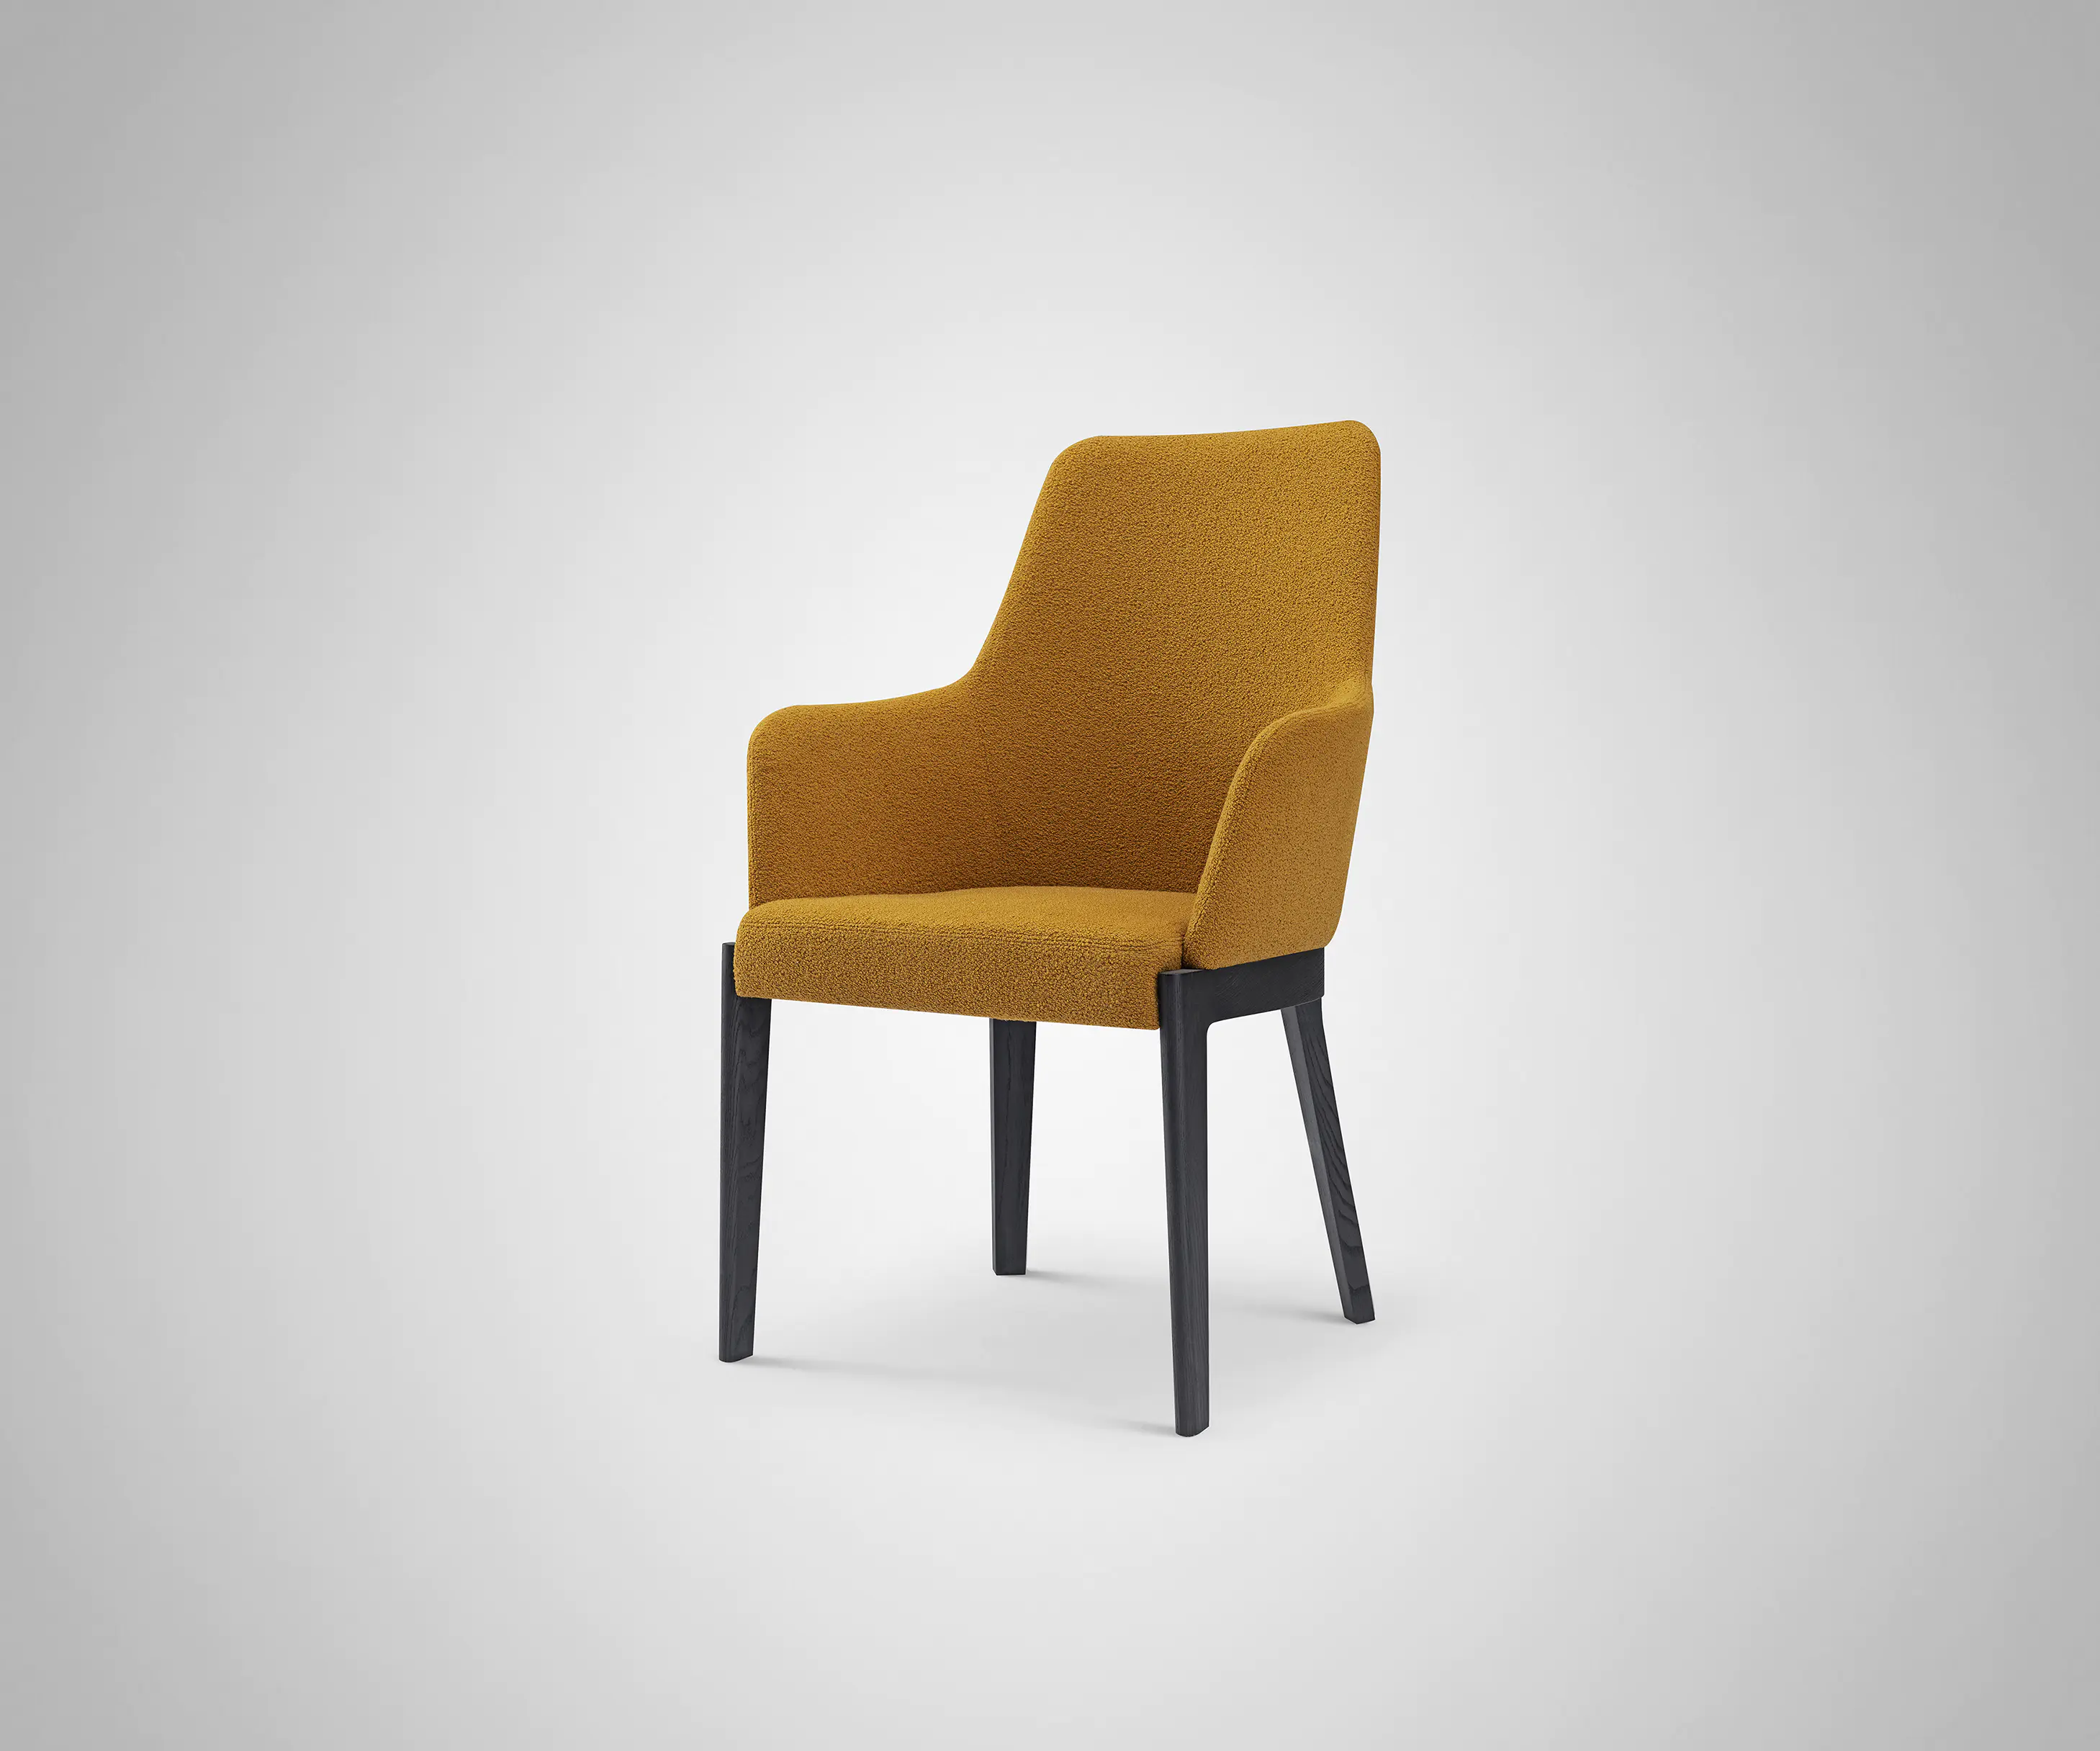 2023 New Design Hotel Furniture Yellow Upholstery Modern Dining Chair